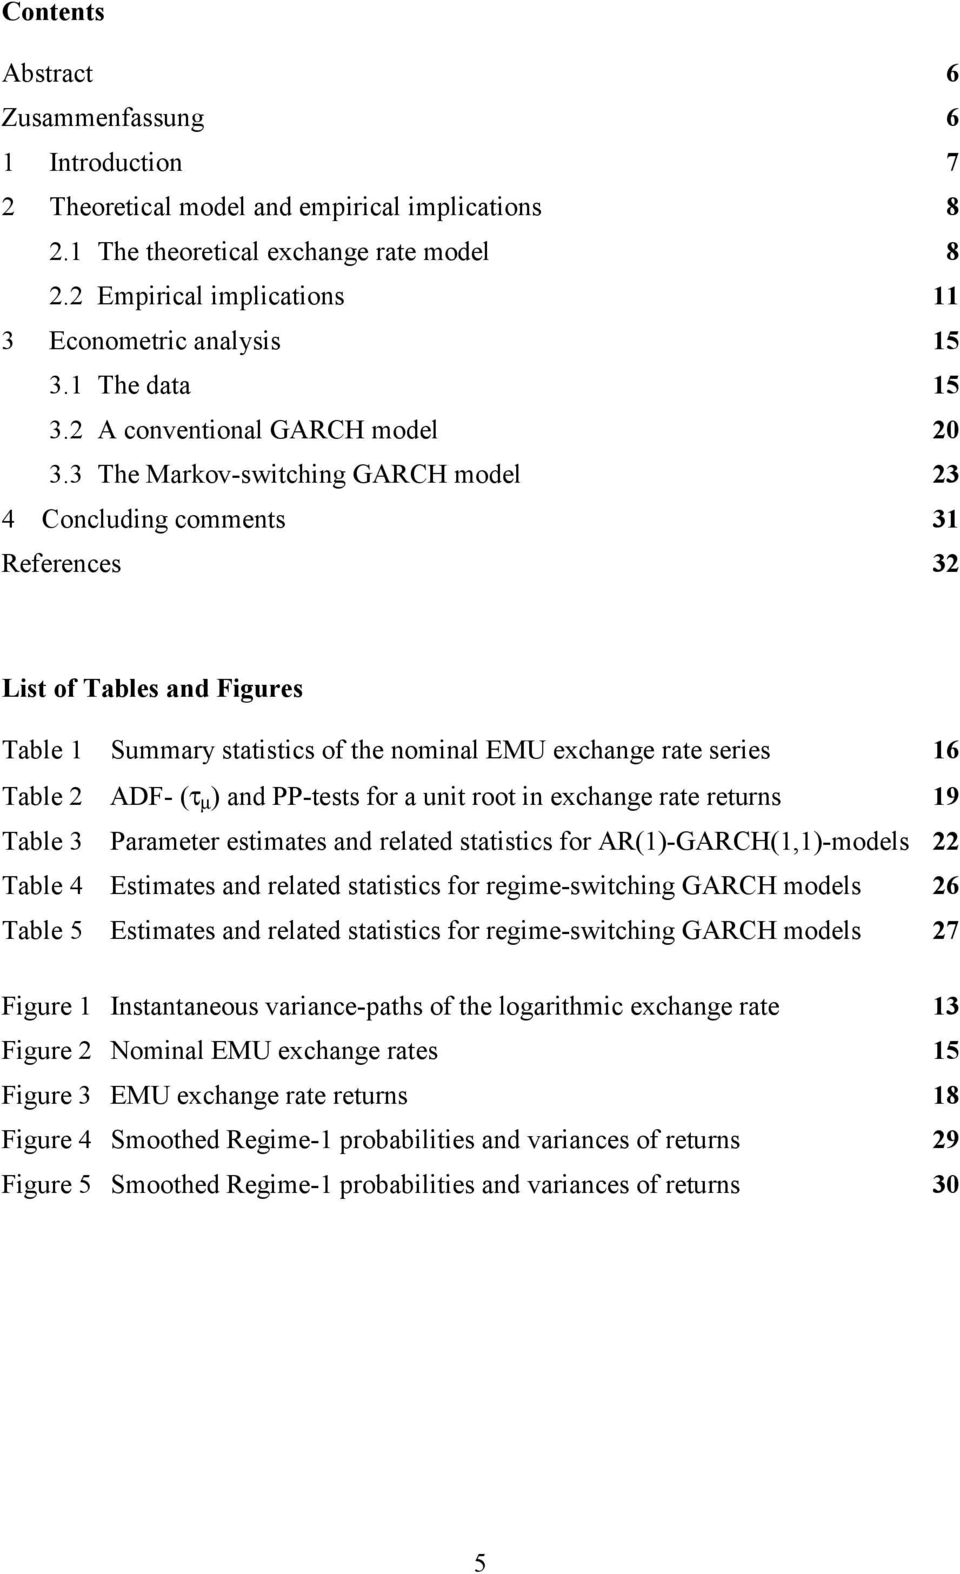 3 The Markov-switching GARCH model 23 4 Concluding comments 31 References 32 List of Tables and Figures Table 1 Summary statistics of the nominal EMU exchange rate series 16 Table 2 ADF- (τ µ ) and